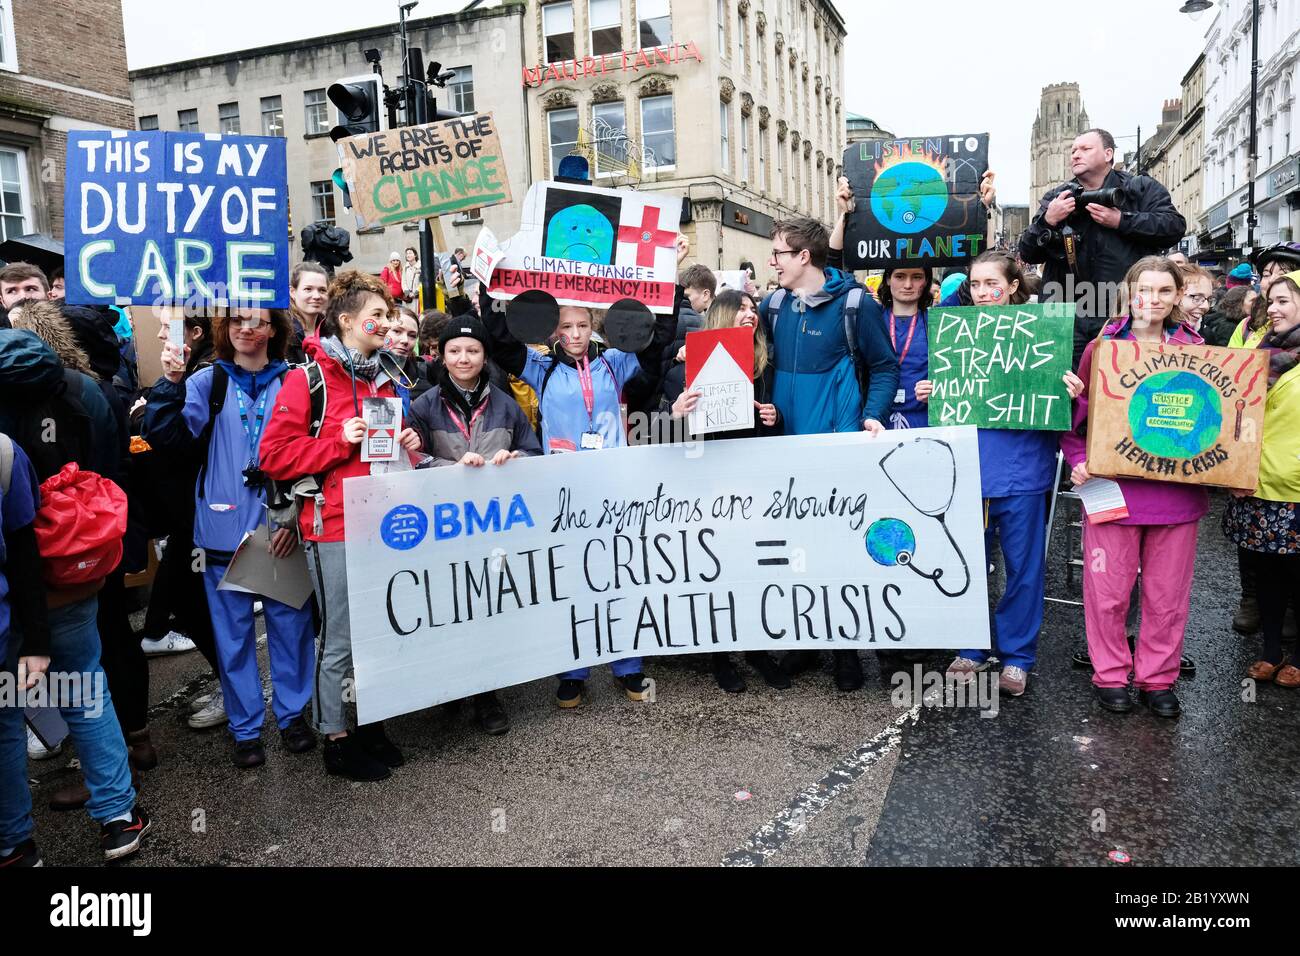 Bristol, UK - Friday 28th February 2020 - Young medical students and protesters gather at the start of the march through the rain to support the Bristol Youth Strike 4 Climate march. Credit: Steven May/Alamy Live News Stock Photo